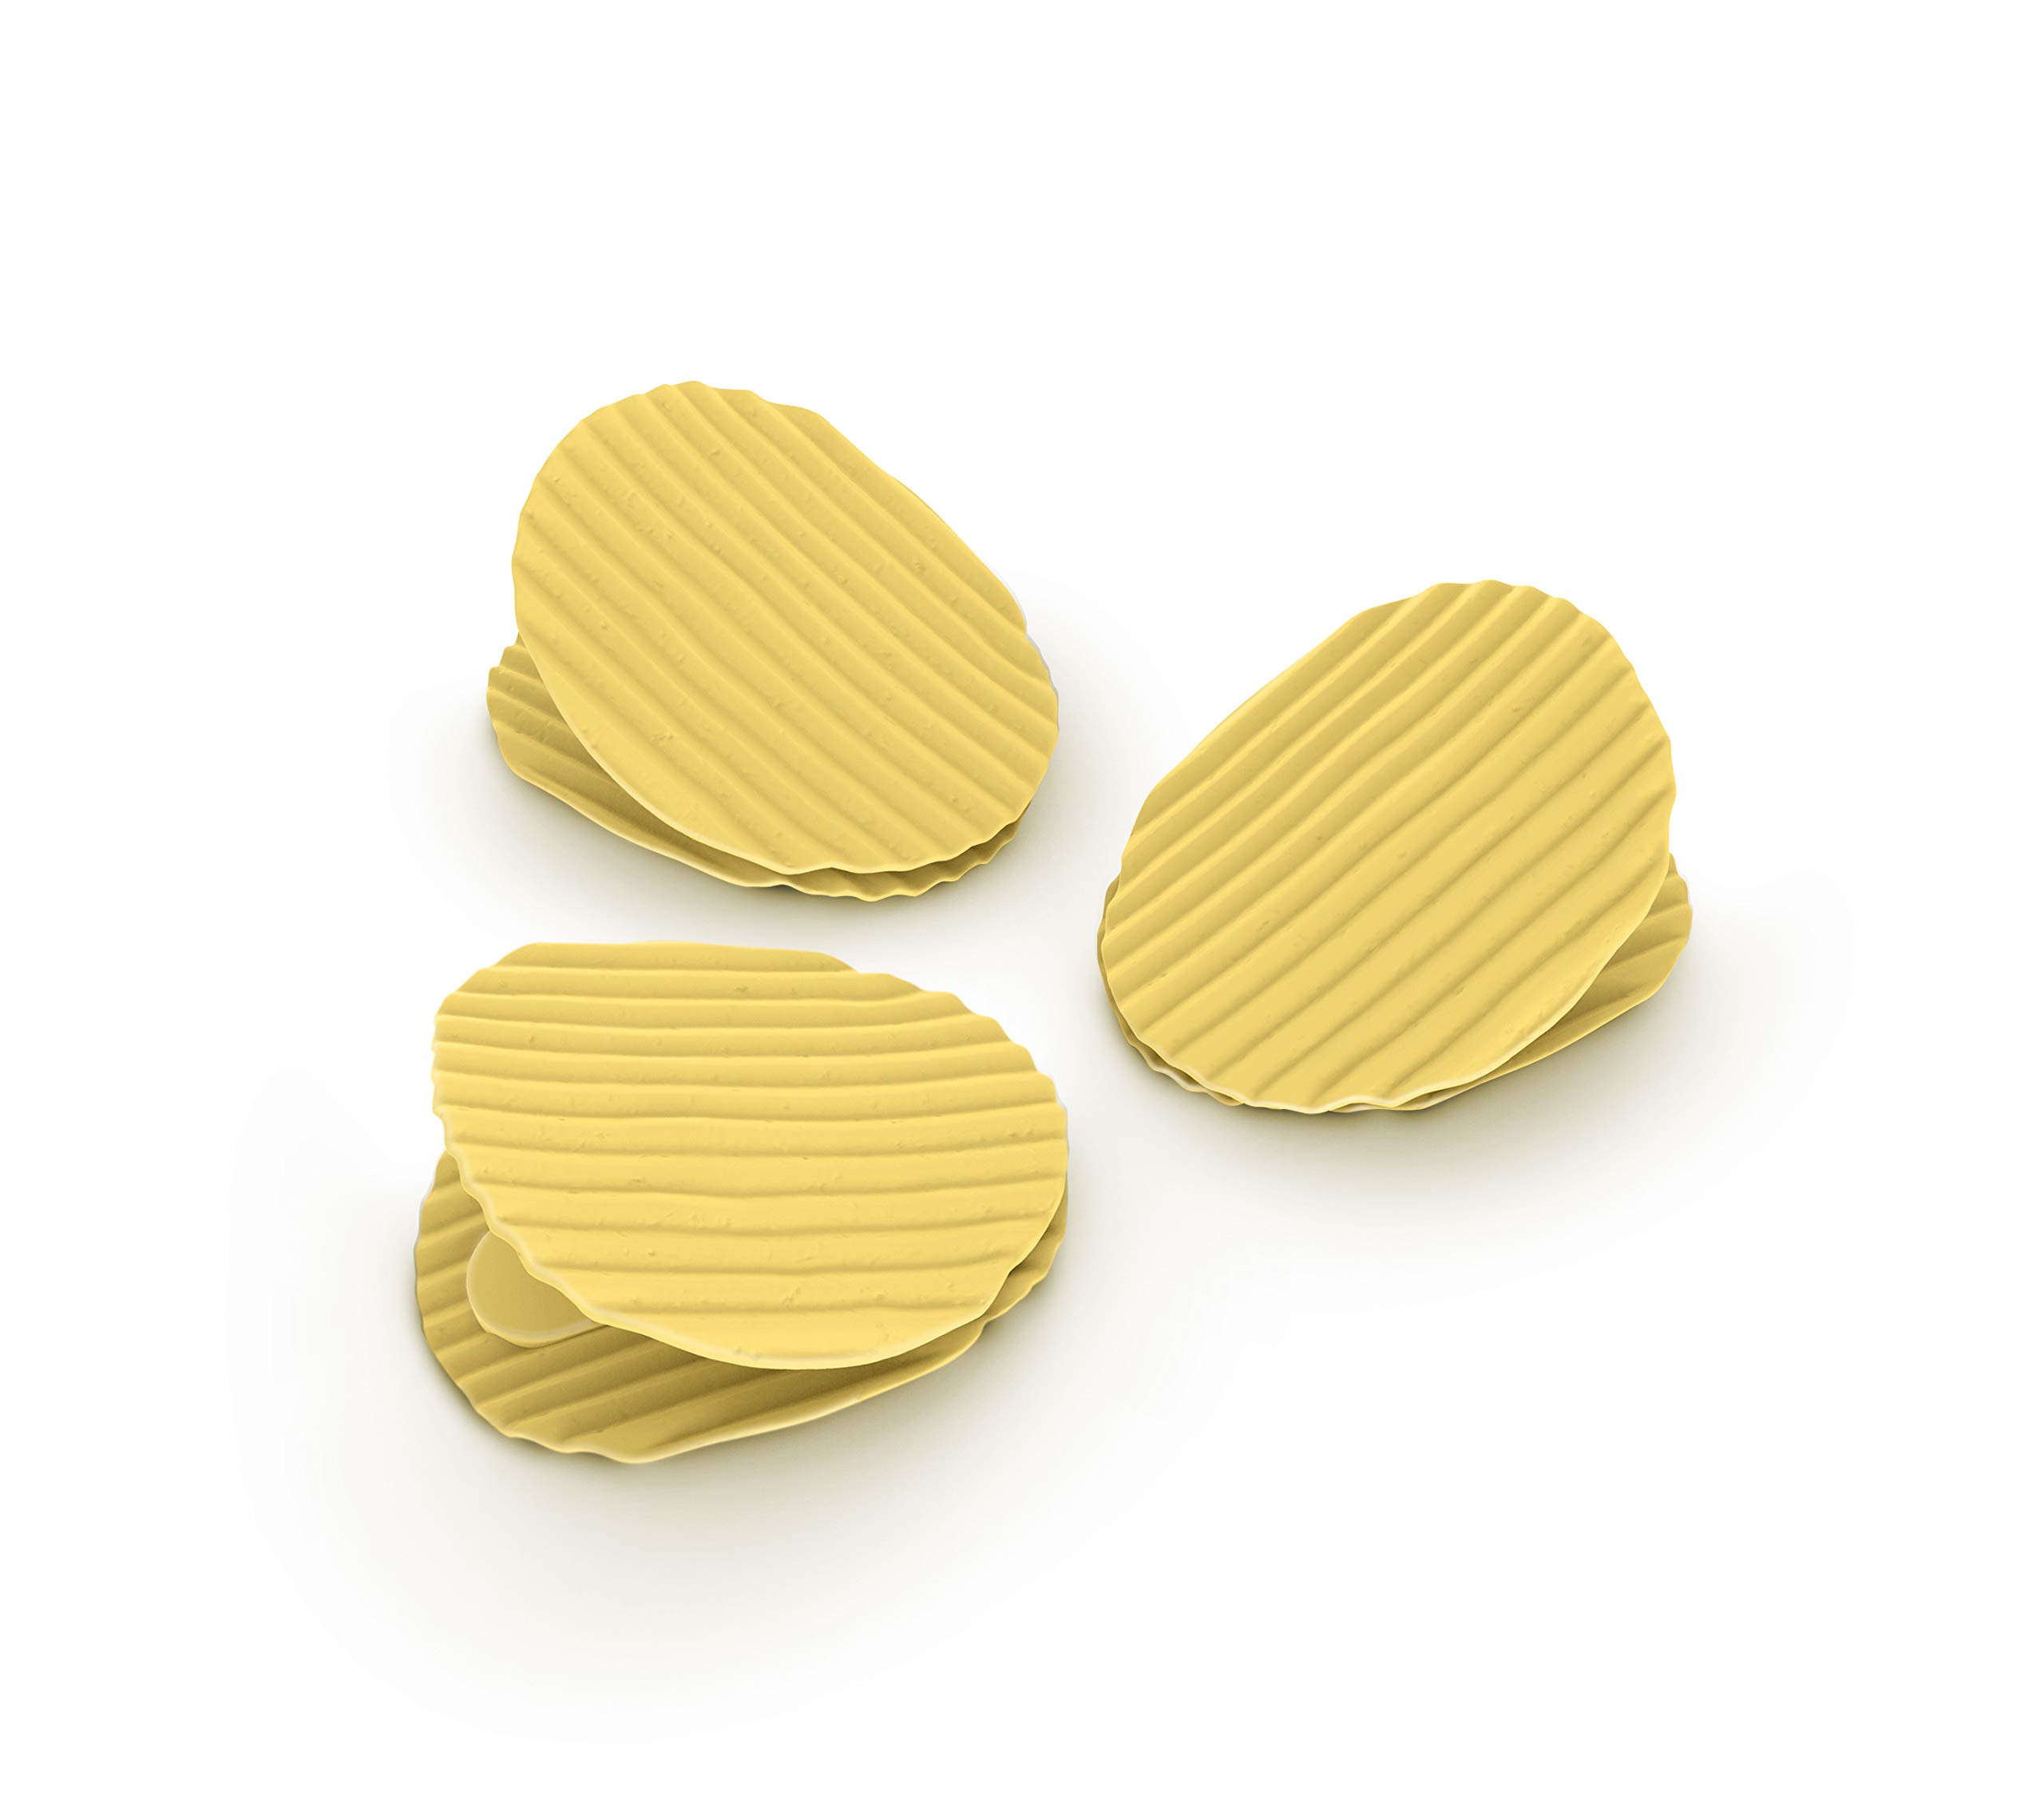 Genuine Fred, POTATO CLIPS - Set of 4 - Wavy Chip Bag Closures, Chip Clips, Bag Clips - Durable Plastic - 2" x 2.25" each - Exclusive Patented Design